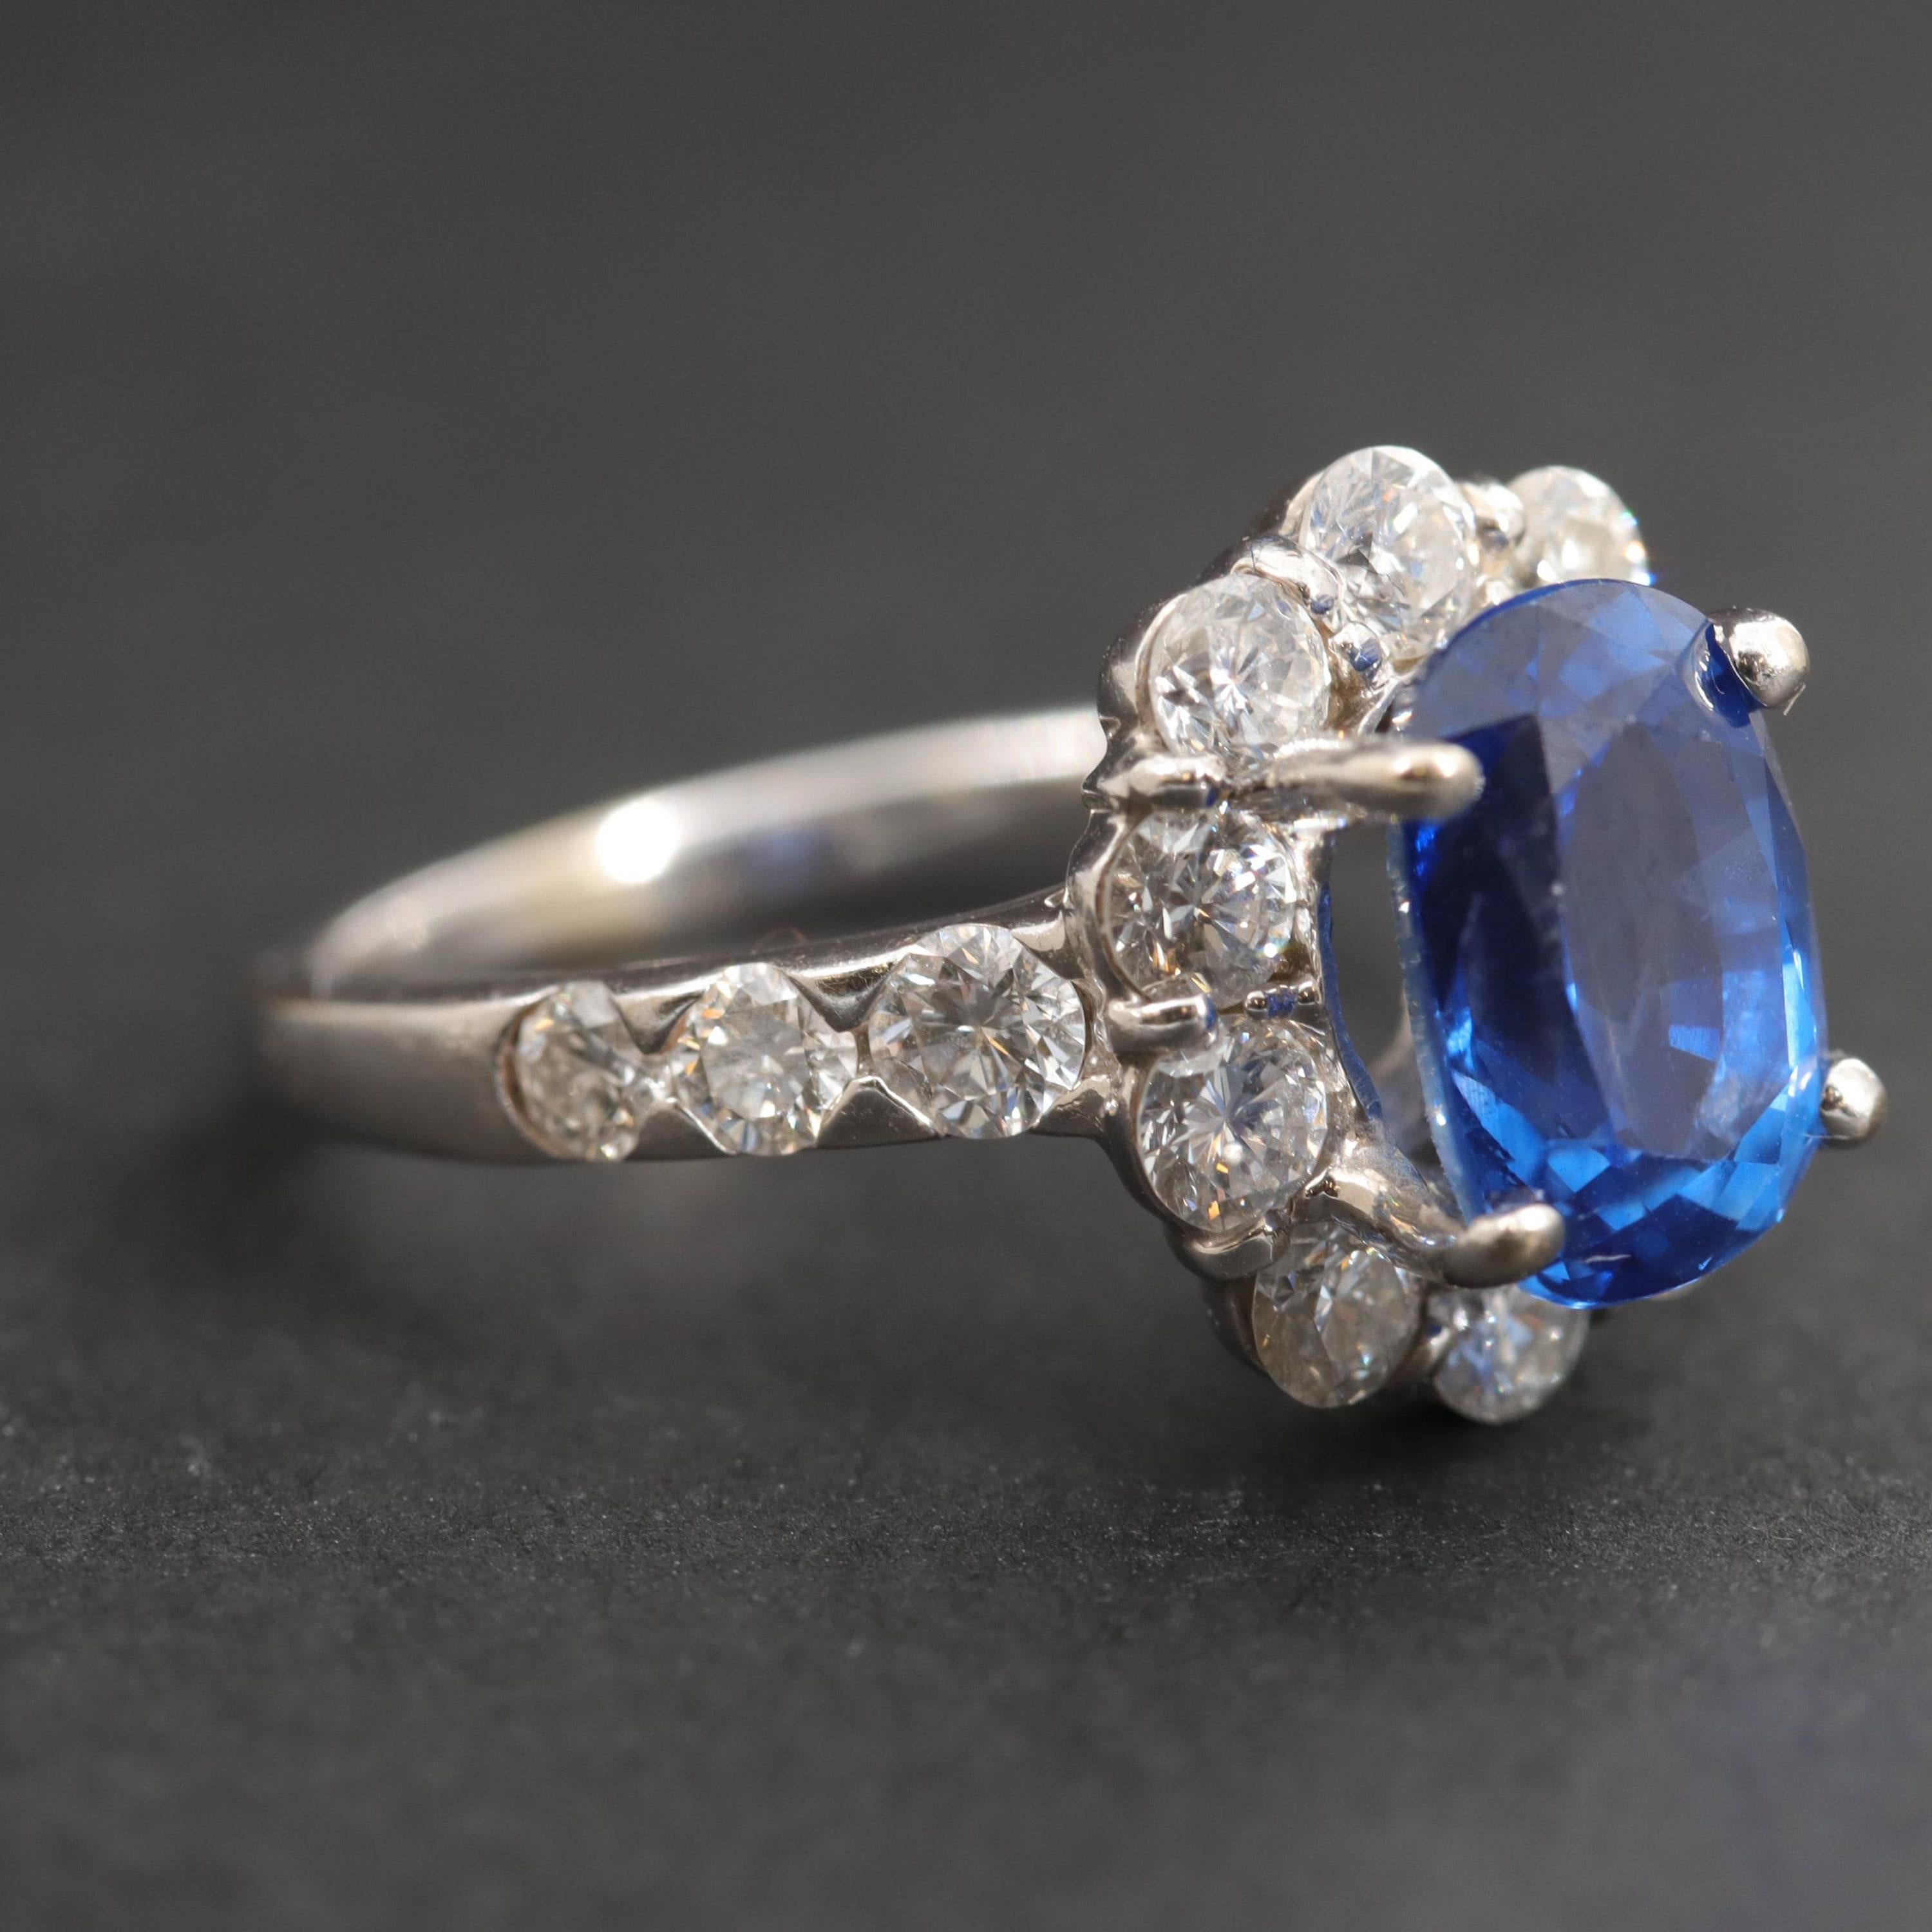 For Sale:  2.9 Carat Sapphire and Diamond Engagement Ring White Gold Sapphire Cocktail Ring 4